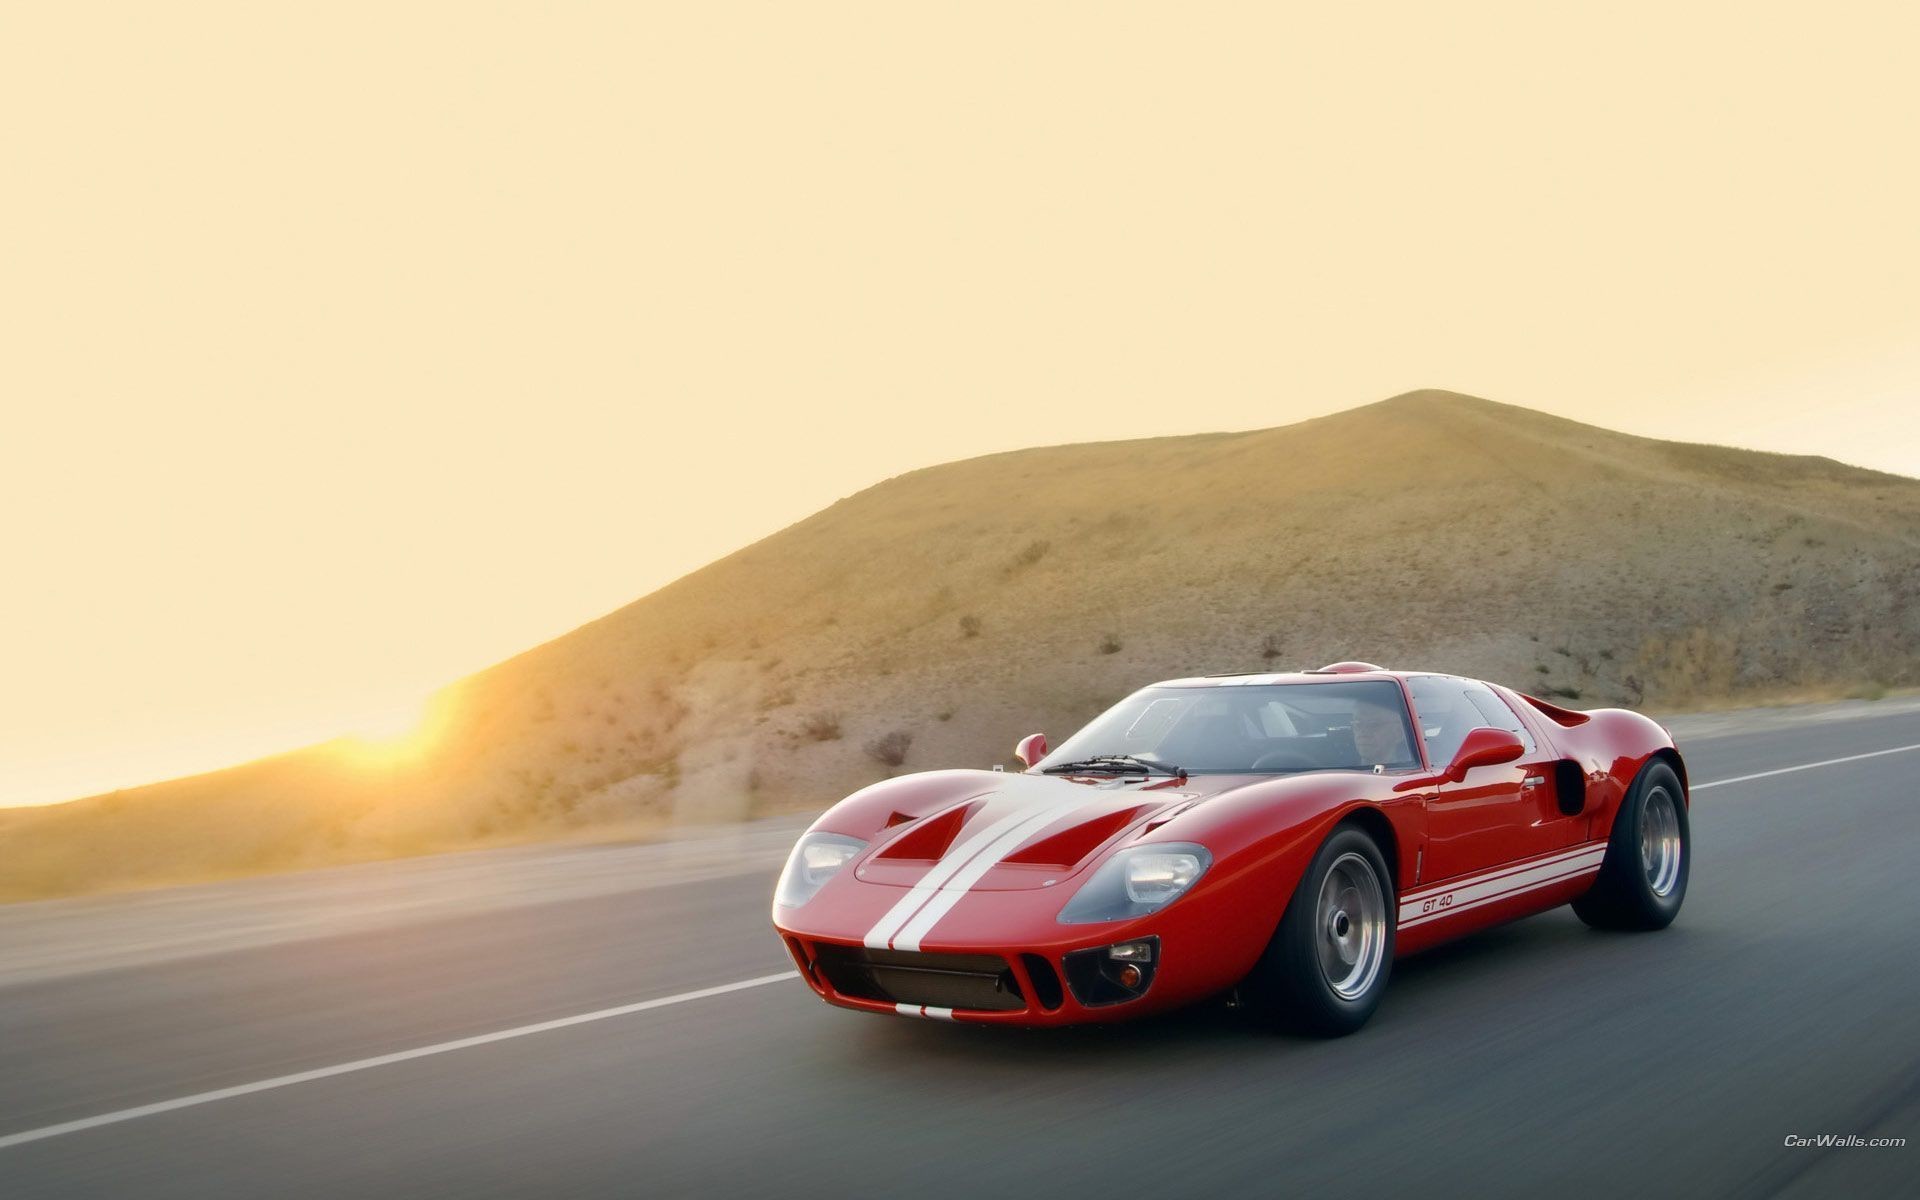 1920x1200 Ford Gt40 Wallpaper 4115 Hd Wallpapers in Cars - Imagesci.com